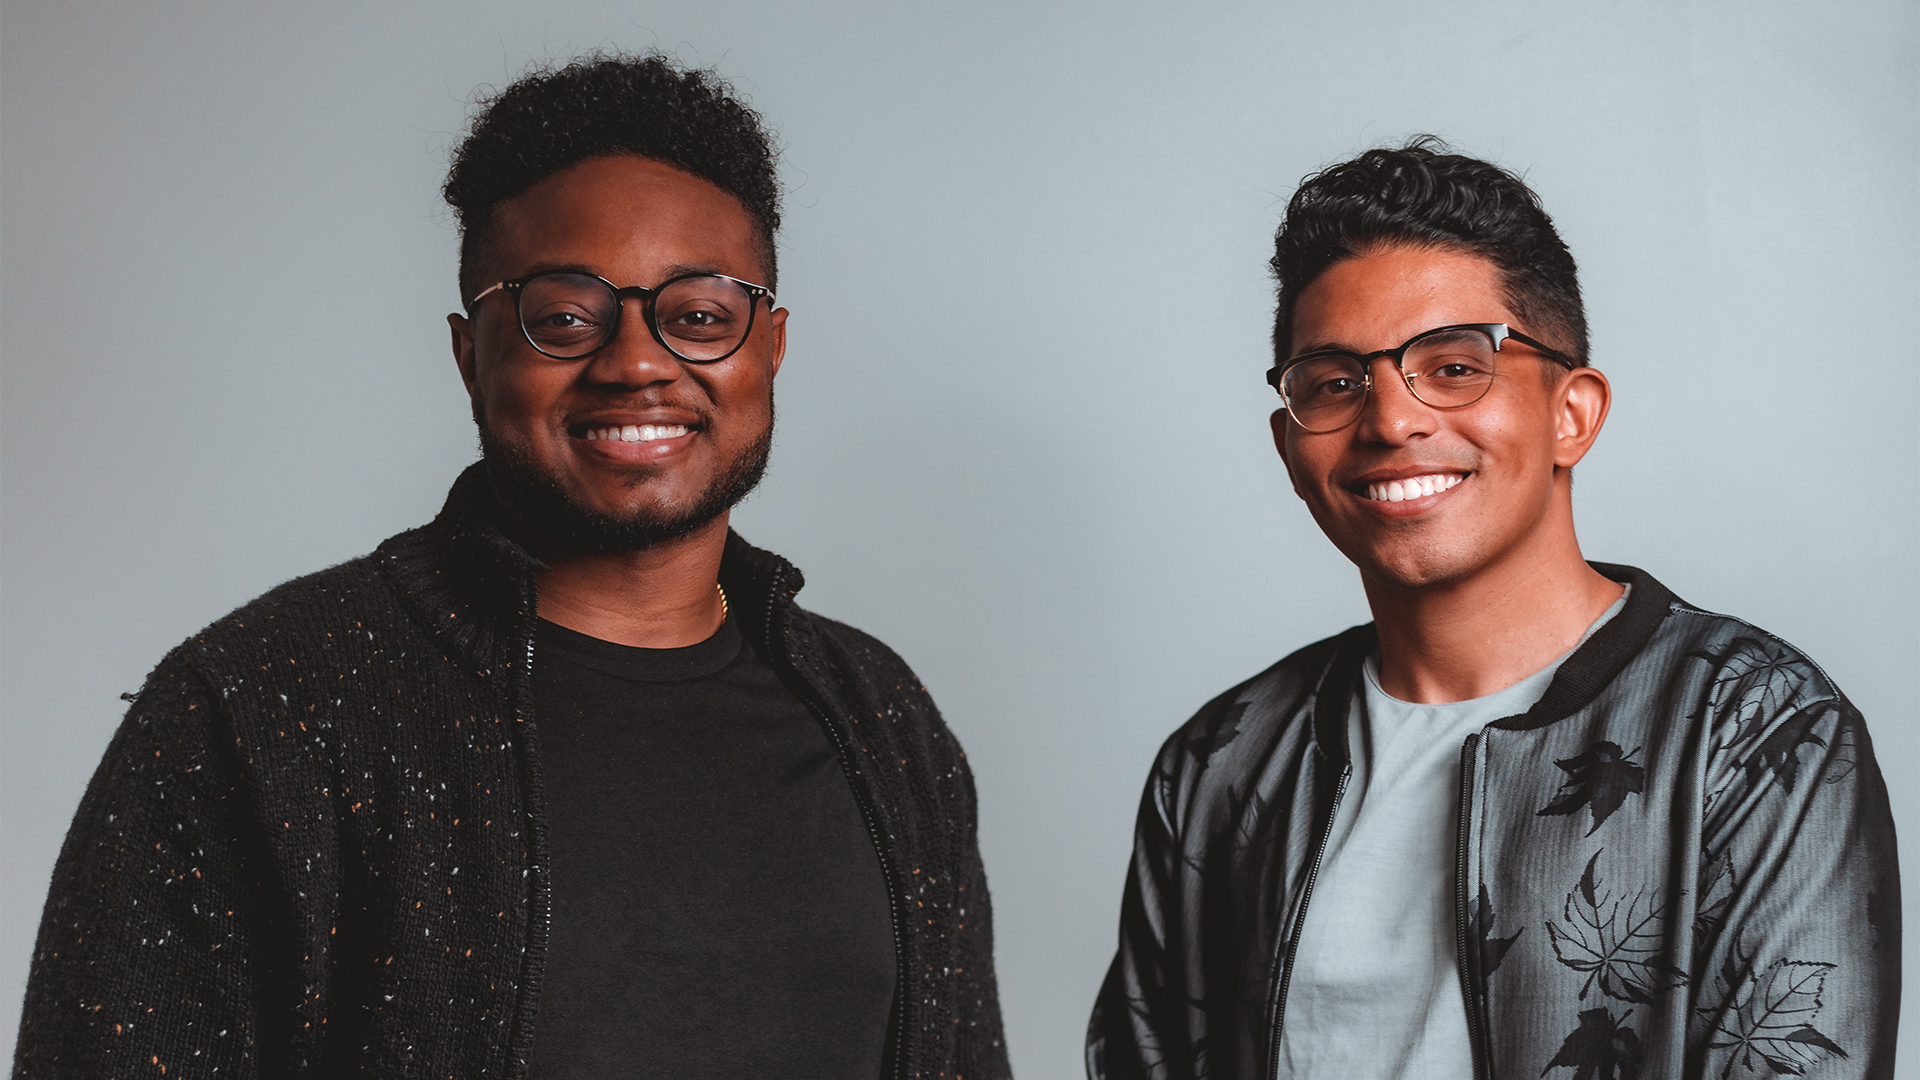 Black-Owned Startup Vori's Technology Is Revolutionizing Easier Digital Ordering For The Grocery Industry